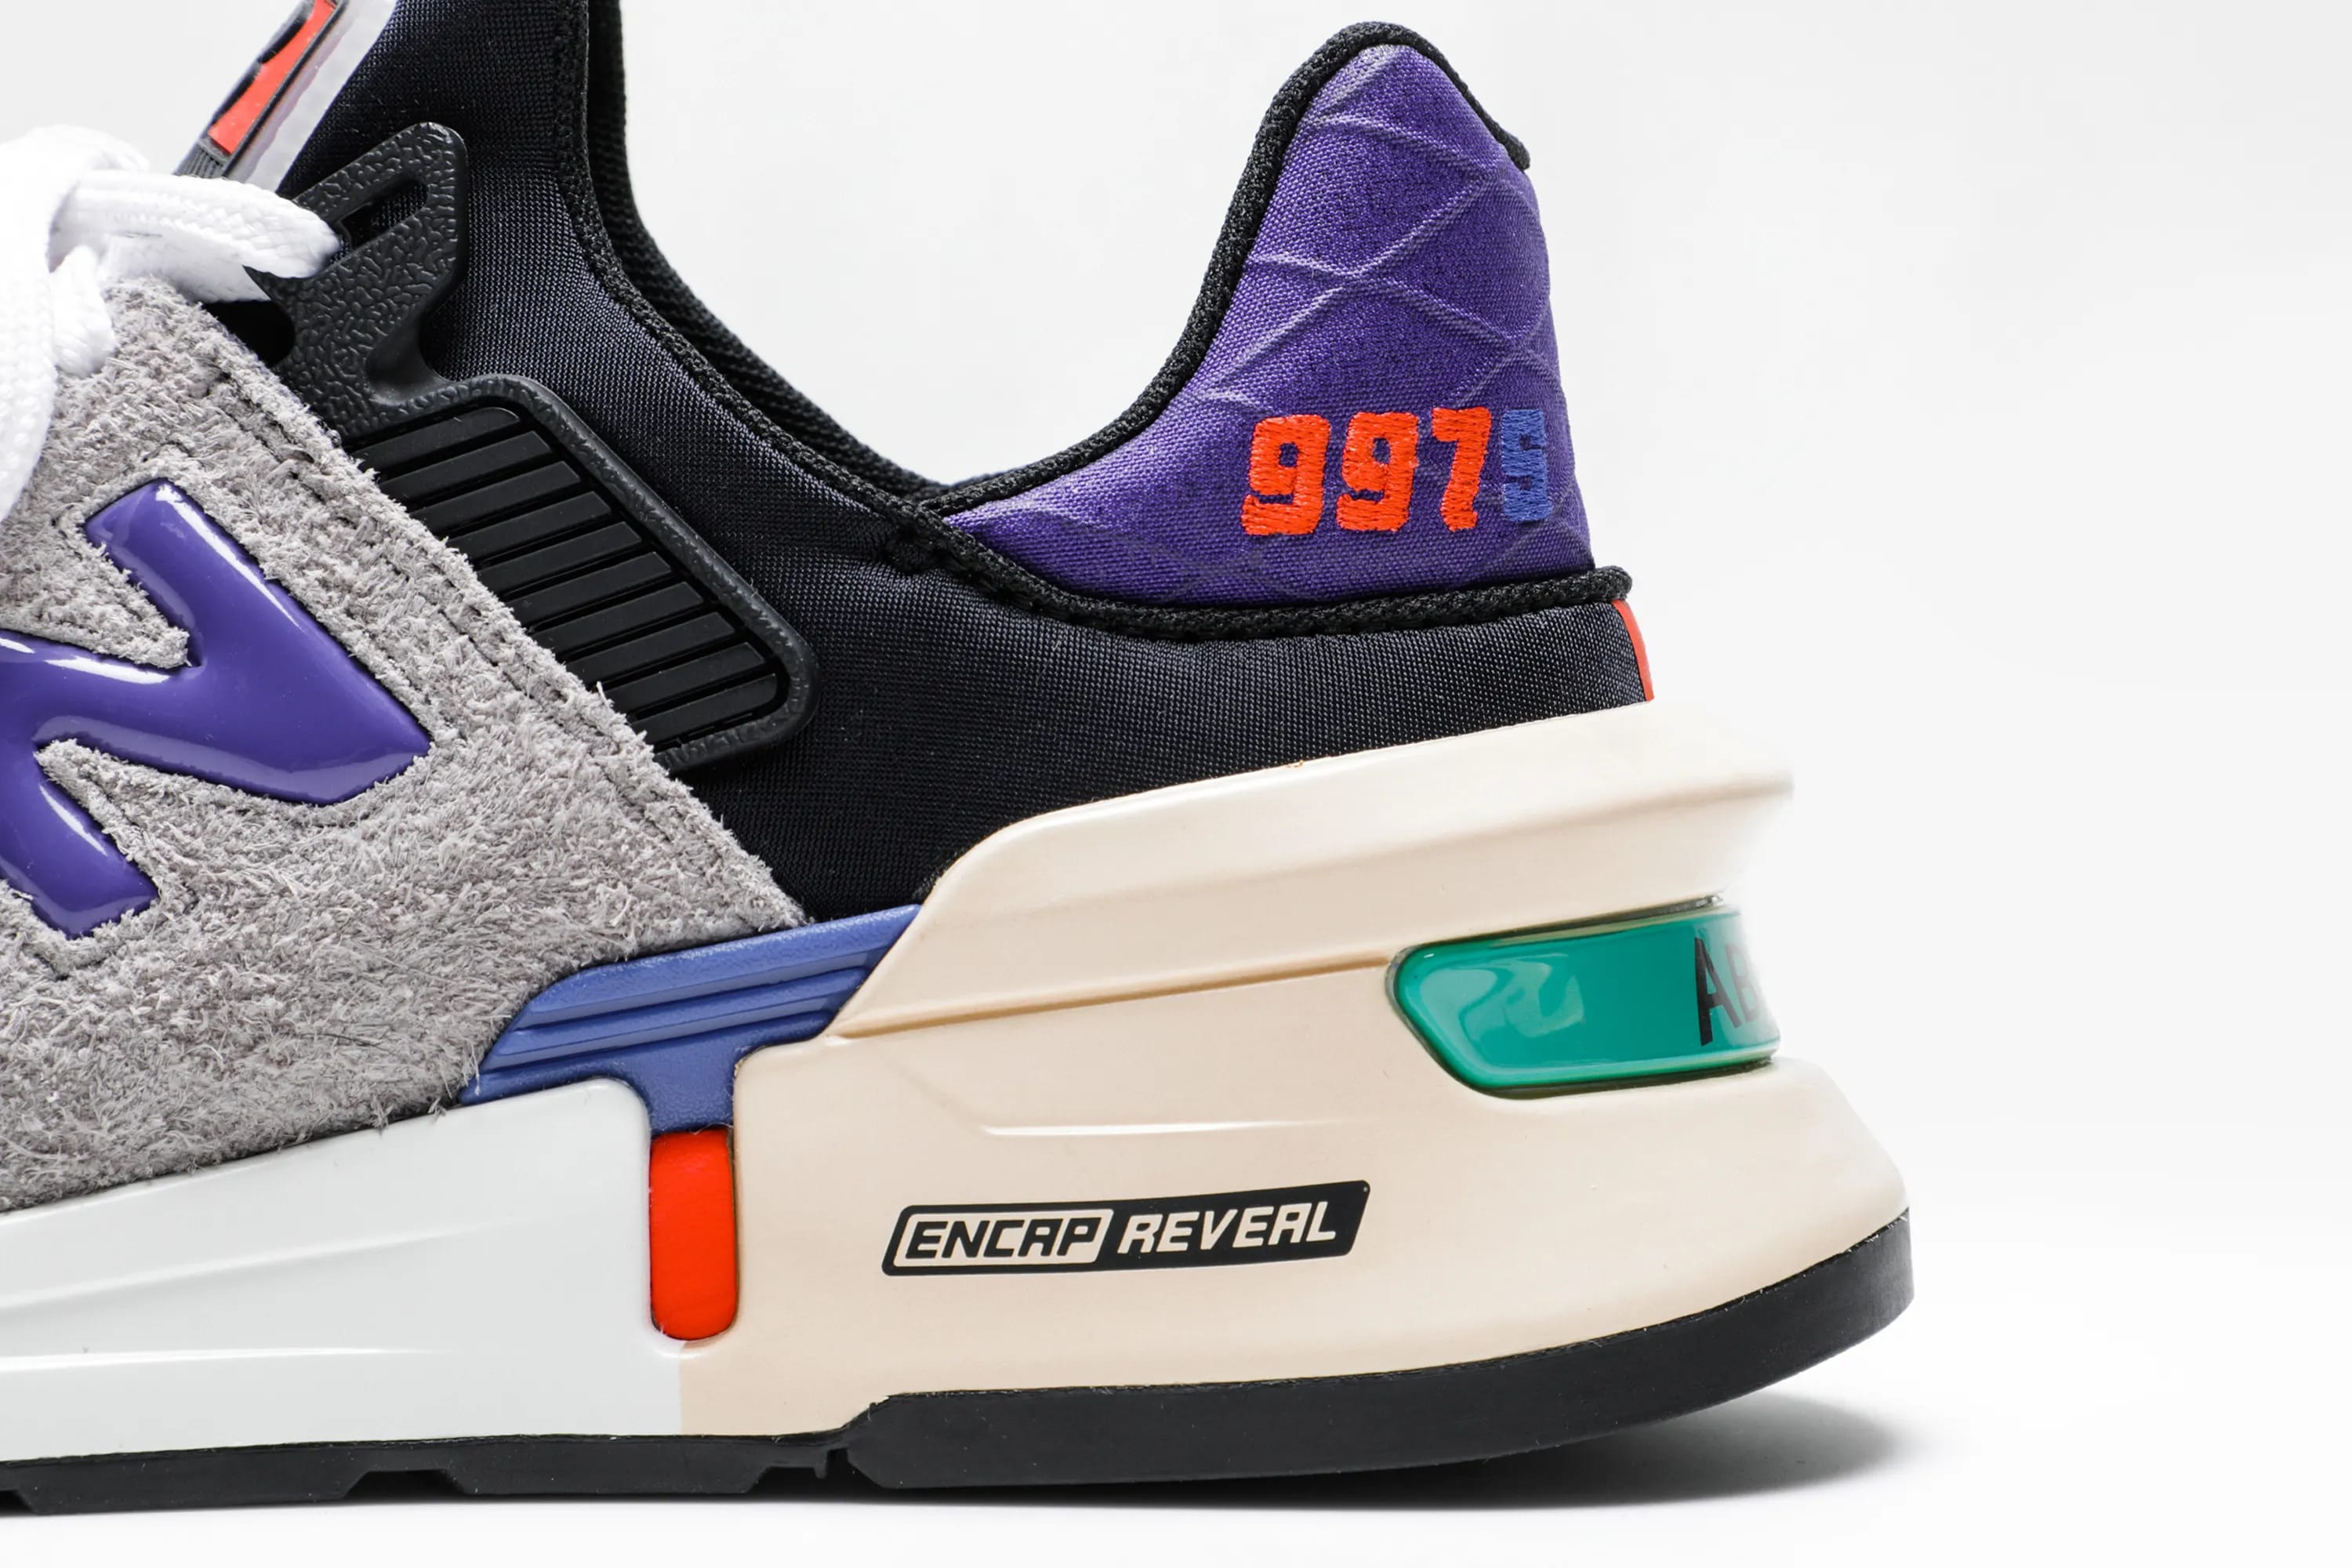 Bodega x New Balance 997S 'No Days Off' Release Date | Sole Collector